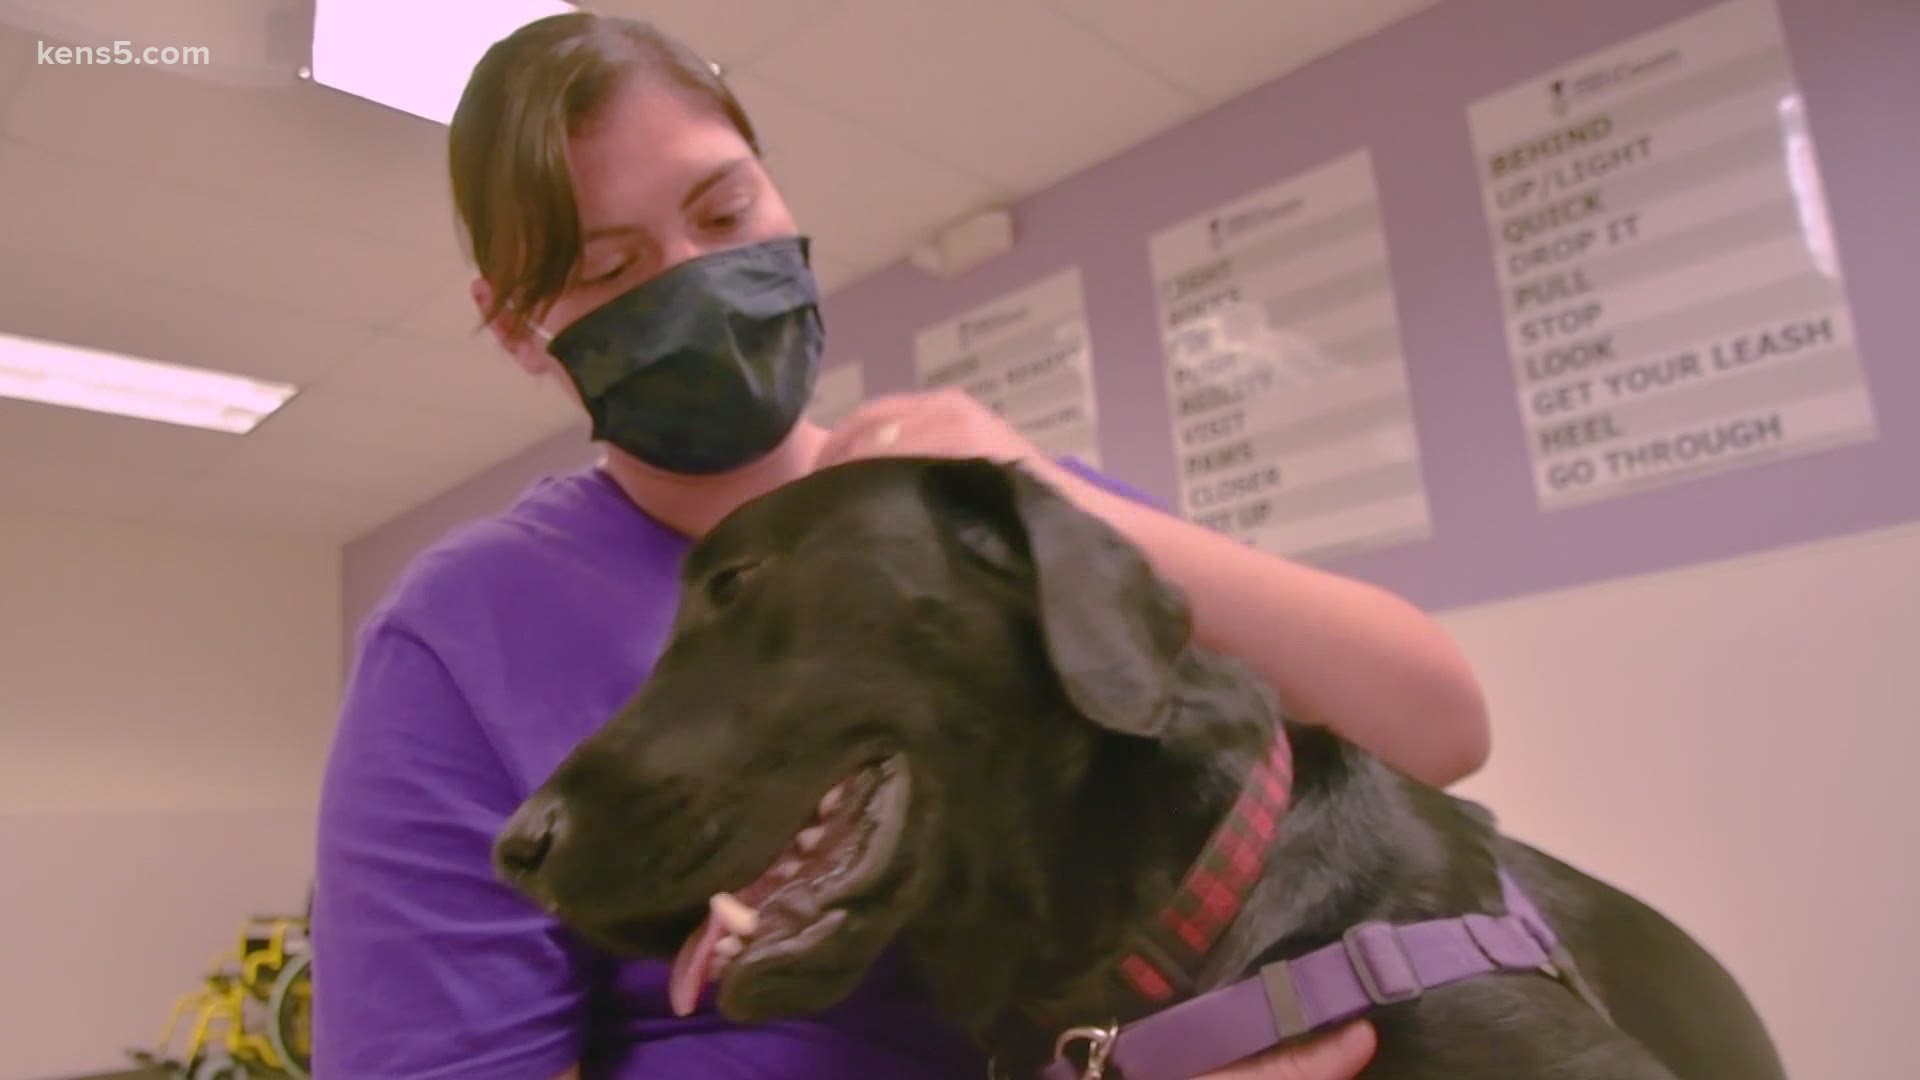 Staff at the nonprofit say the experience benefits humans just as much as the dogs.